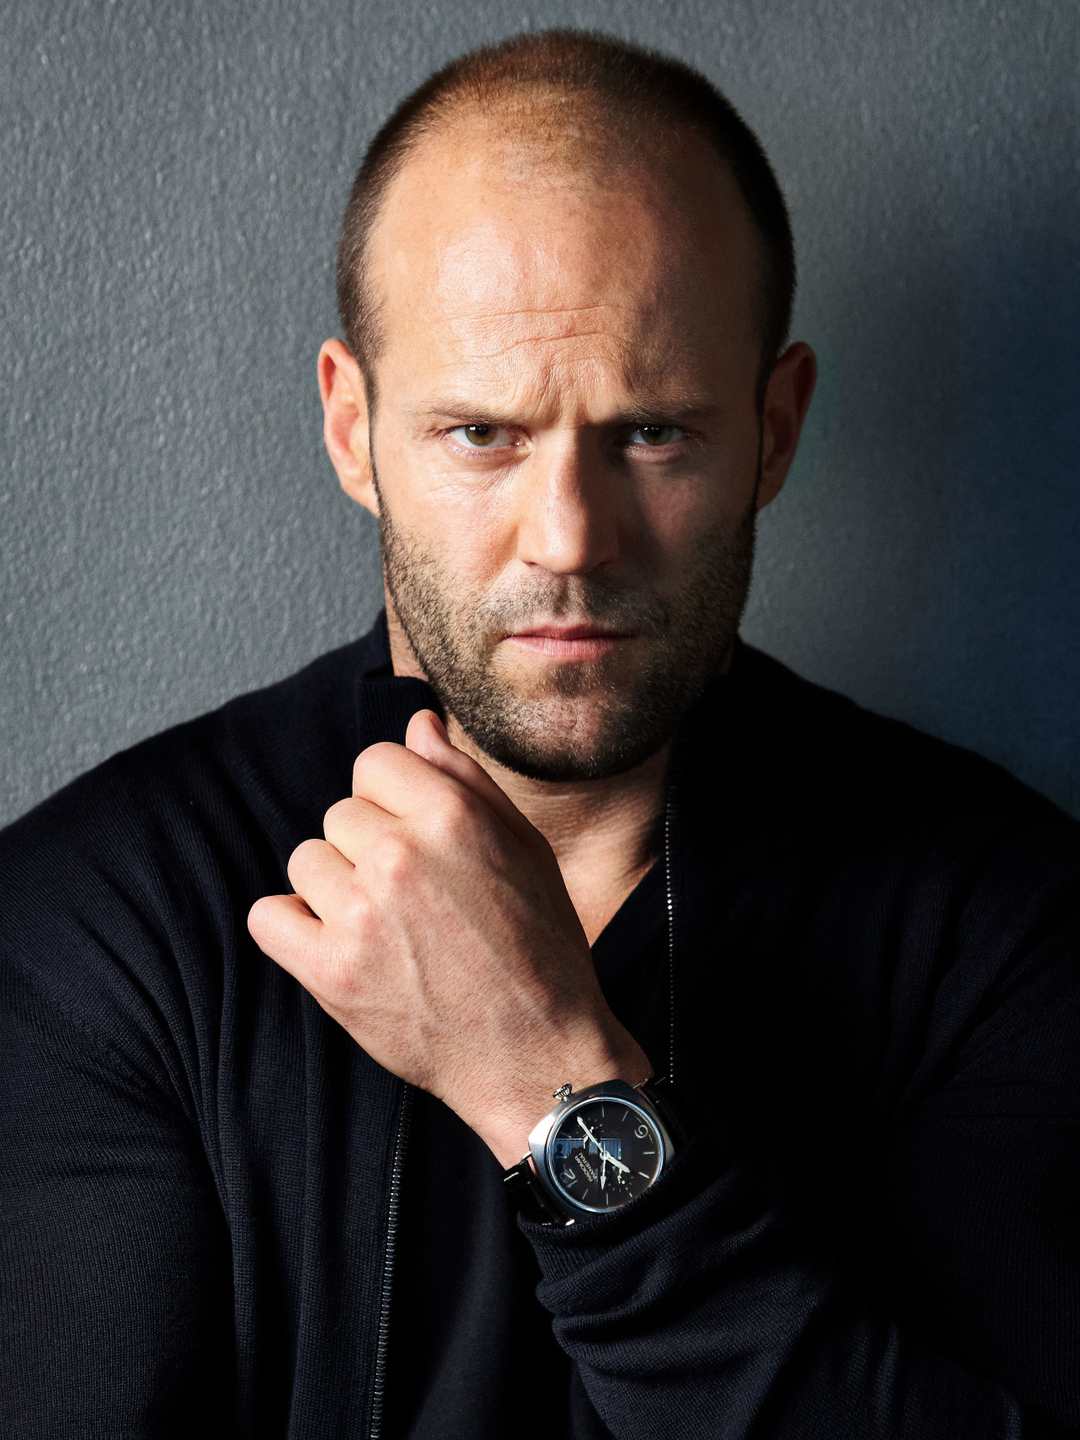 Jason Statham in his youth